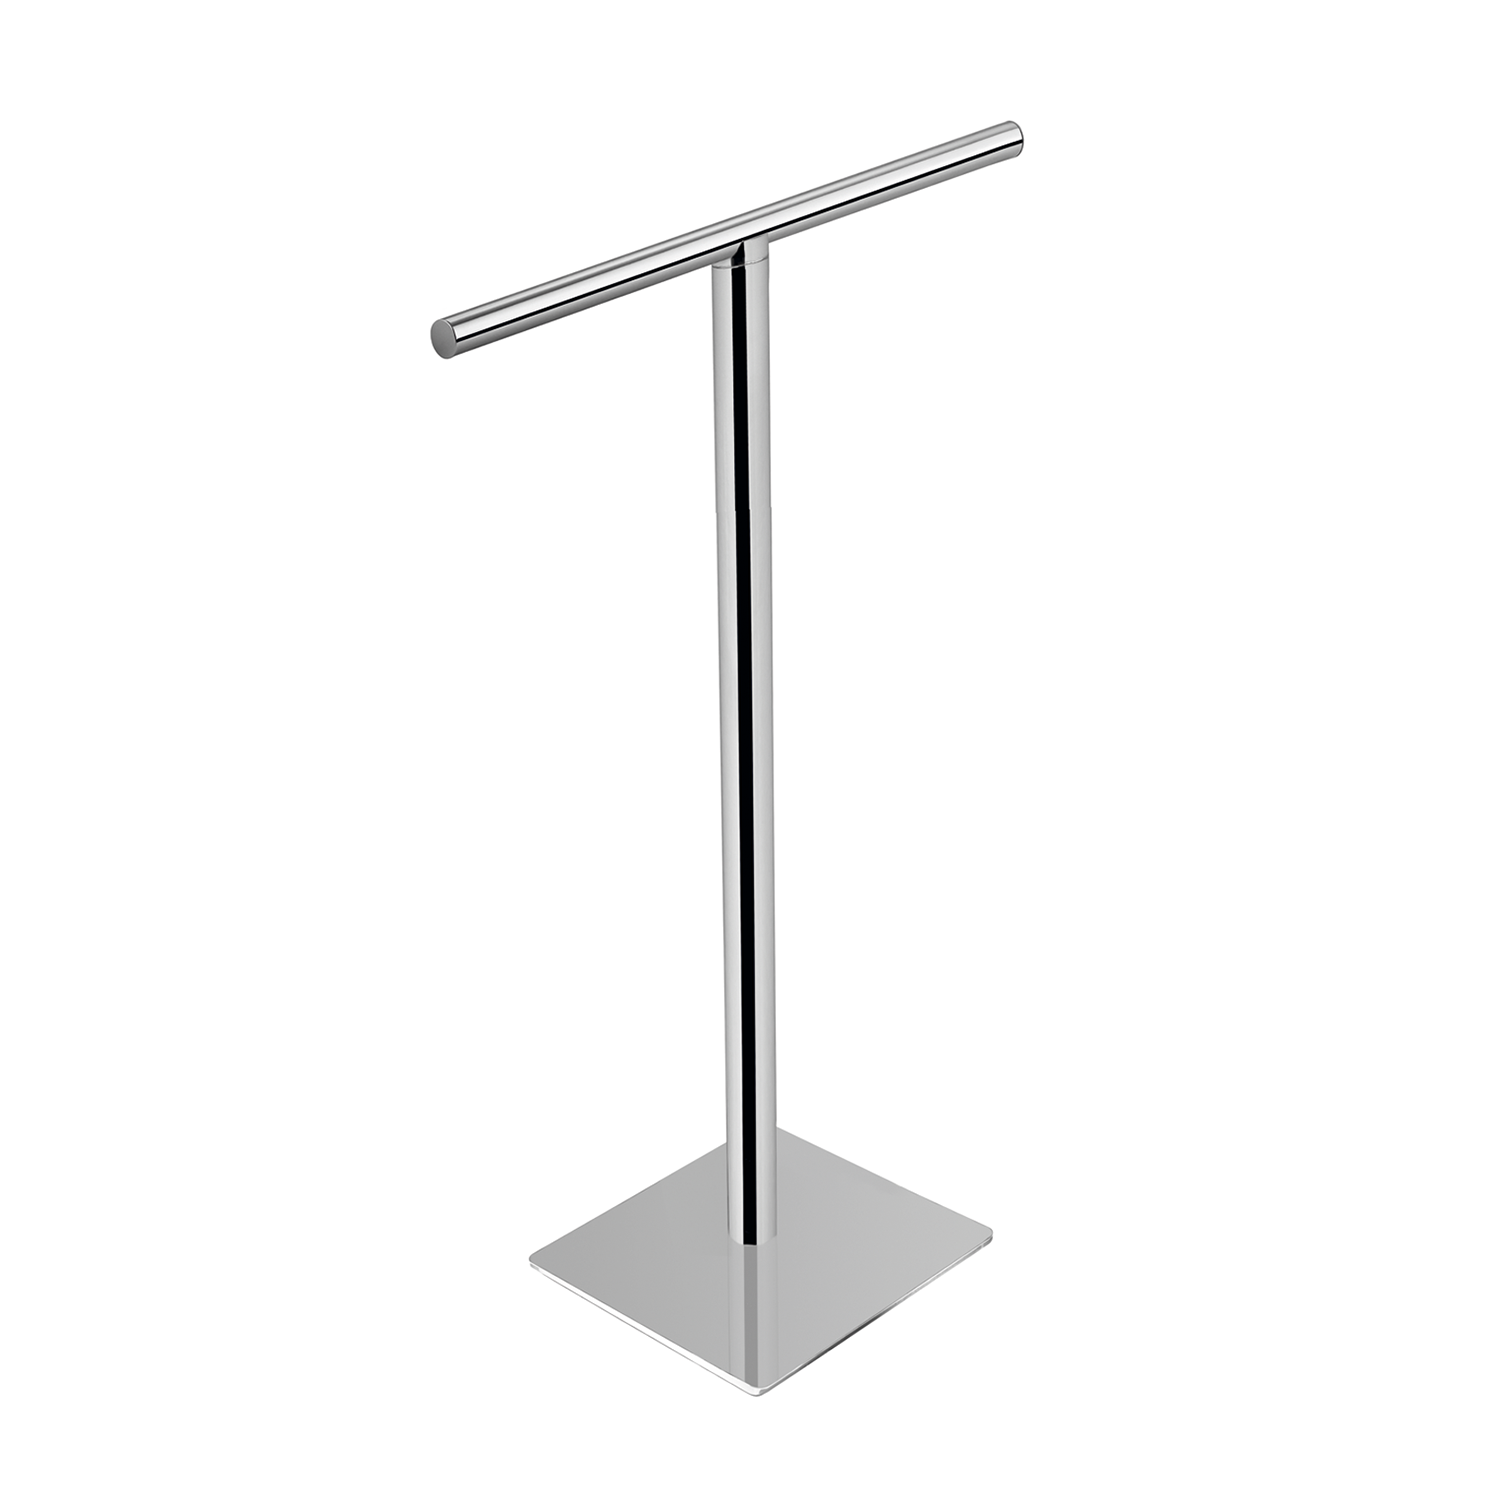 COSMIC Project Standing Towel Rack, Brass Body, Chrome Finish, 23-5/8 x 30-5/8 x 7-7/8 Inches (2510167)